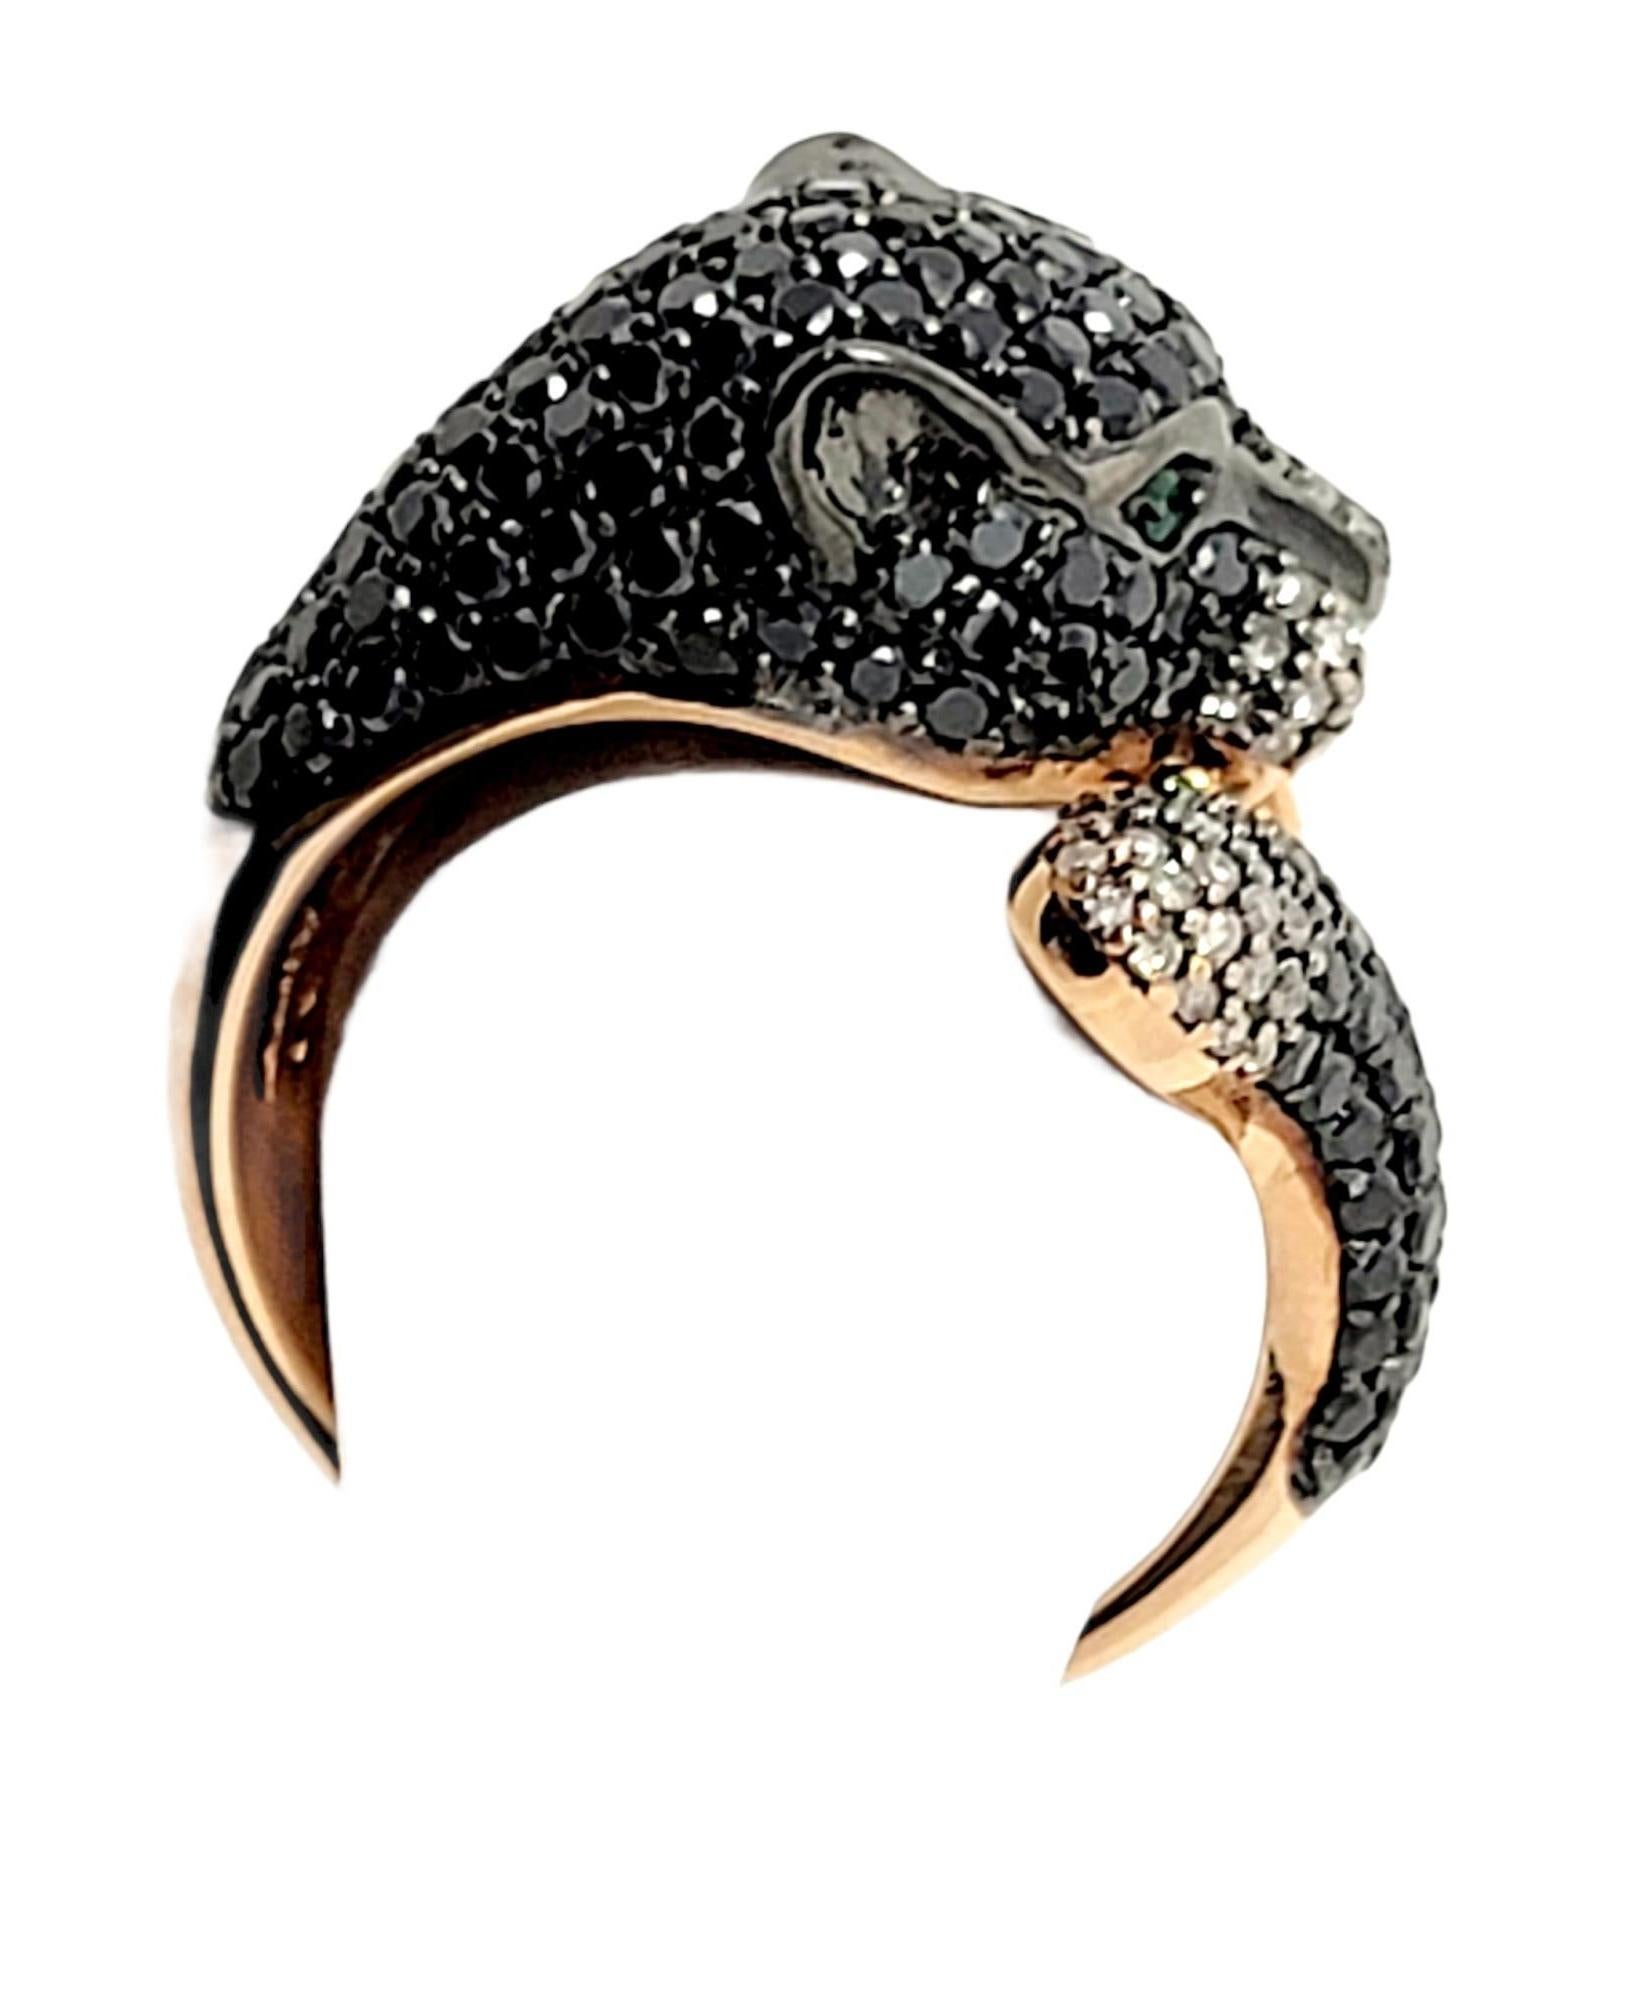 EFFY Signature Black and White Diamond Panther Bypass Ring 14 Karat Rose Gold In Good Condition For Sale In Scottsdale, AZ